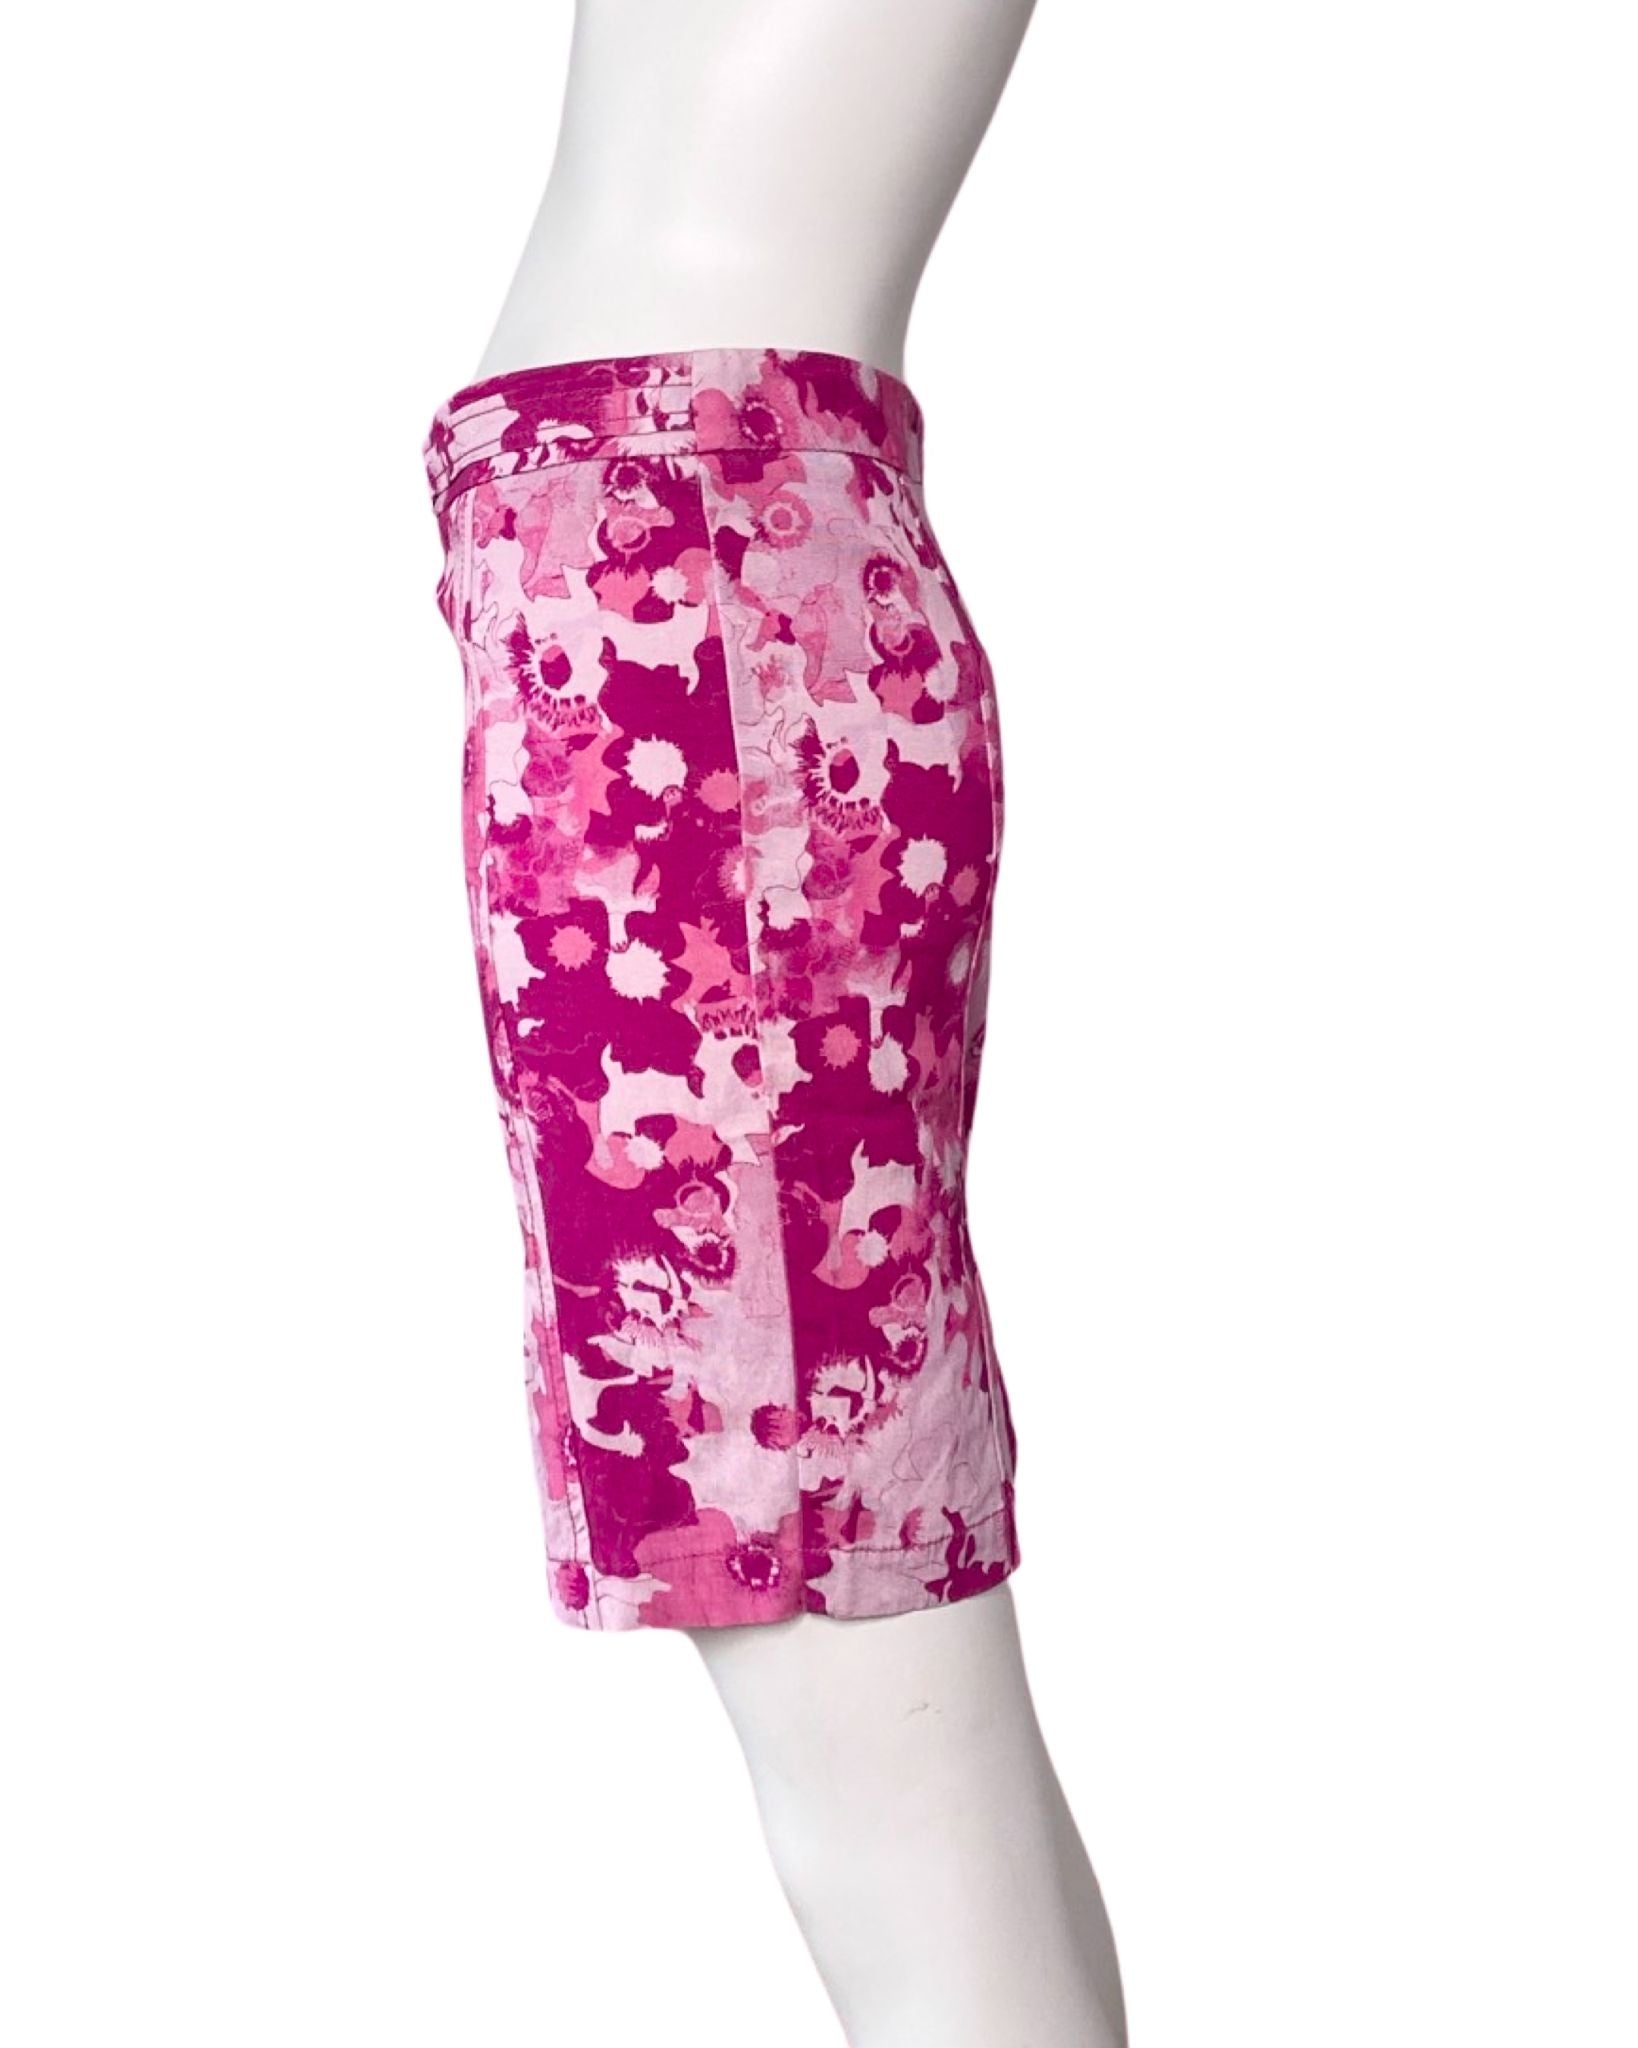 VERSACE JEANS PINK FLORAL SKIRT - 3